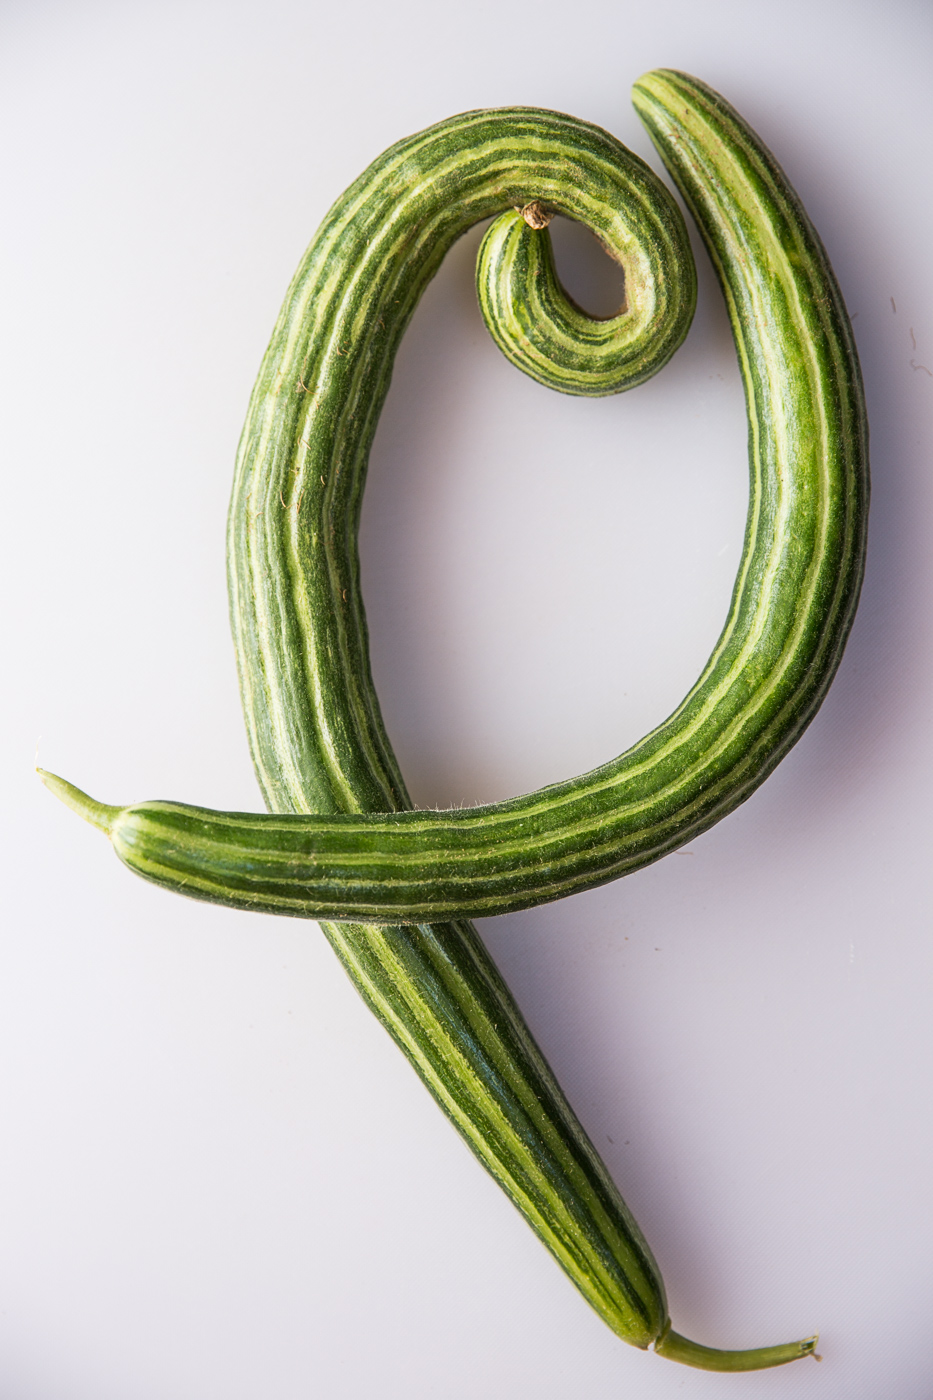 Sara Stathas agriculture photographer - painted serpent cucumber